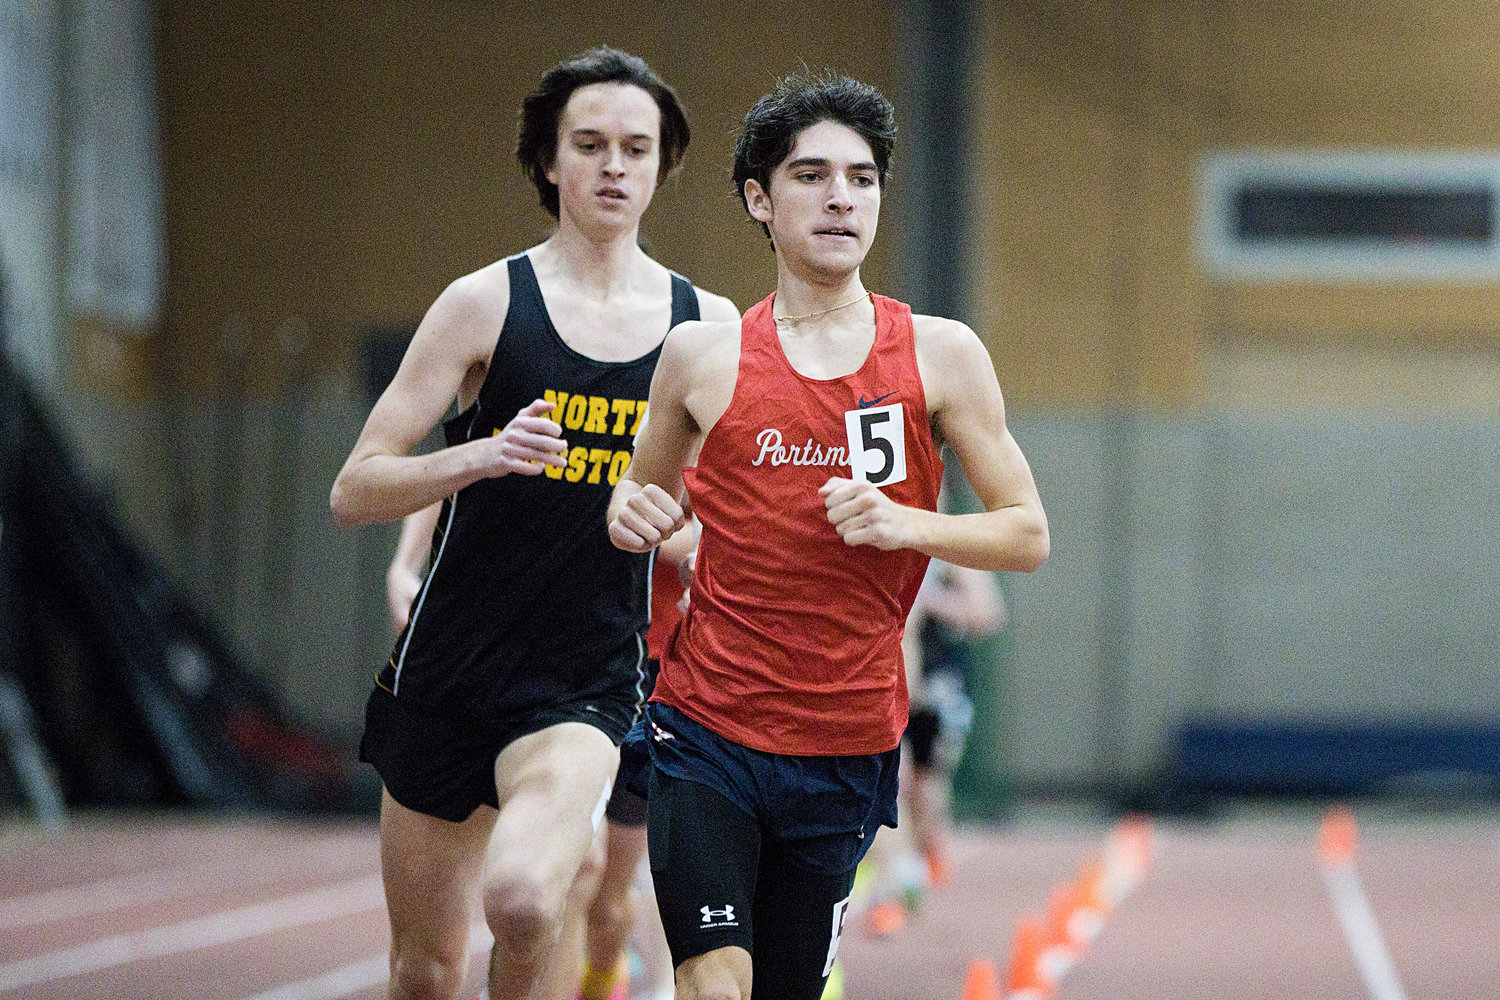 Chris Vachon leads the way while competing in the 1,000-meter race, which he’d go on to win with a time of 2:54.27.